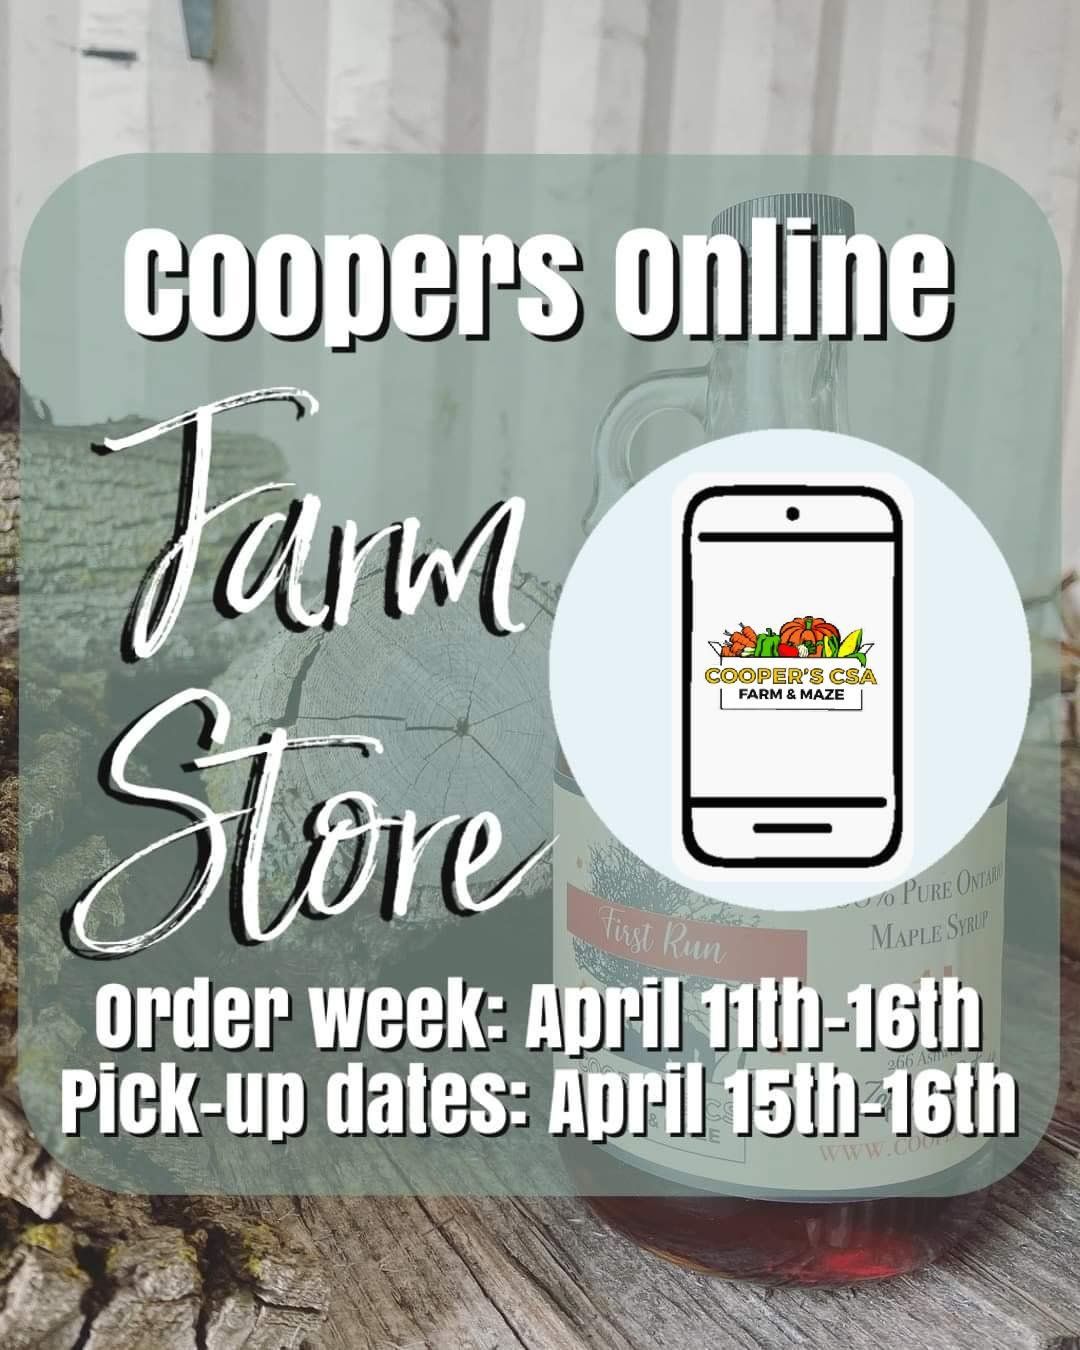 Next Happening: Coopers Online Farm Stand- Order week April 11th-16th